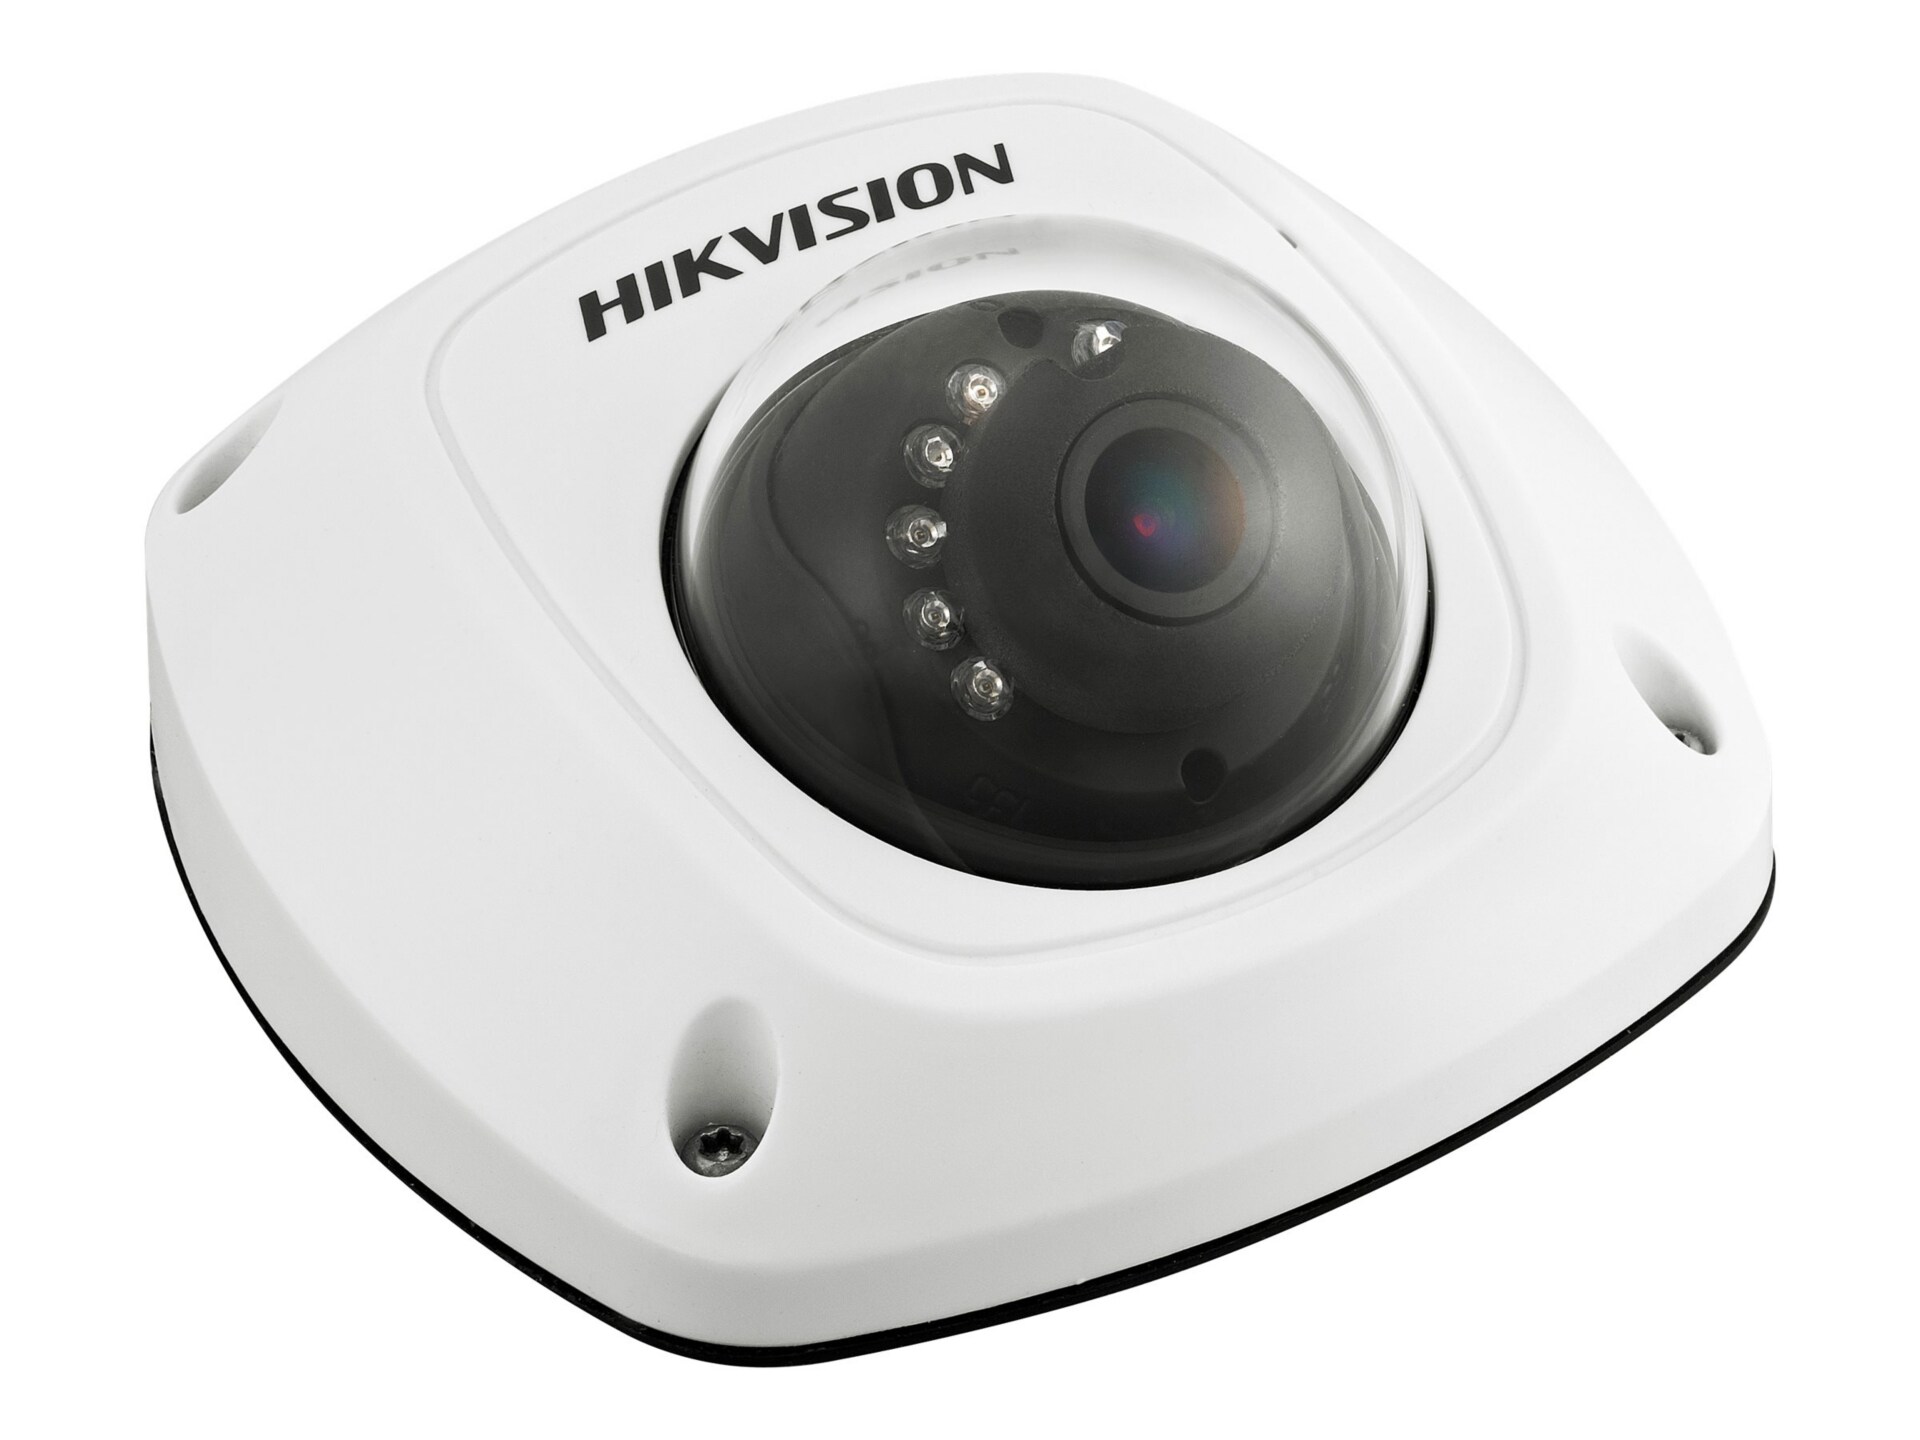 Hikvision DS-2CD2542FWD-IWS-2.8MM 4MP Outdoor Mini Dome IP Camera